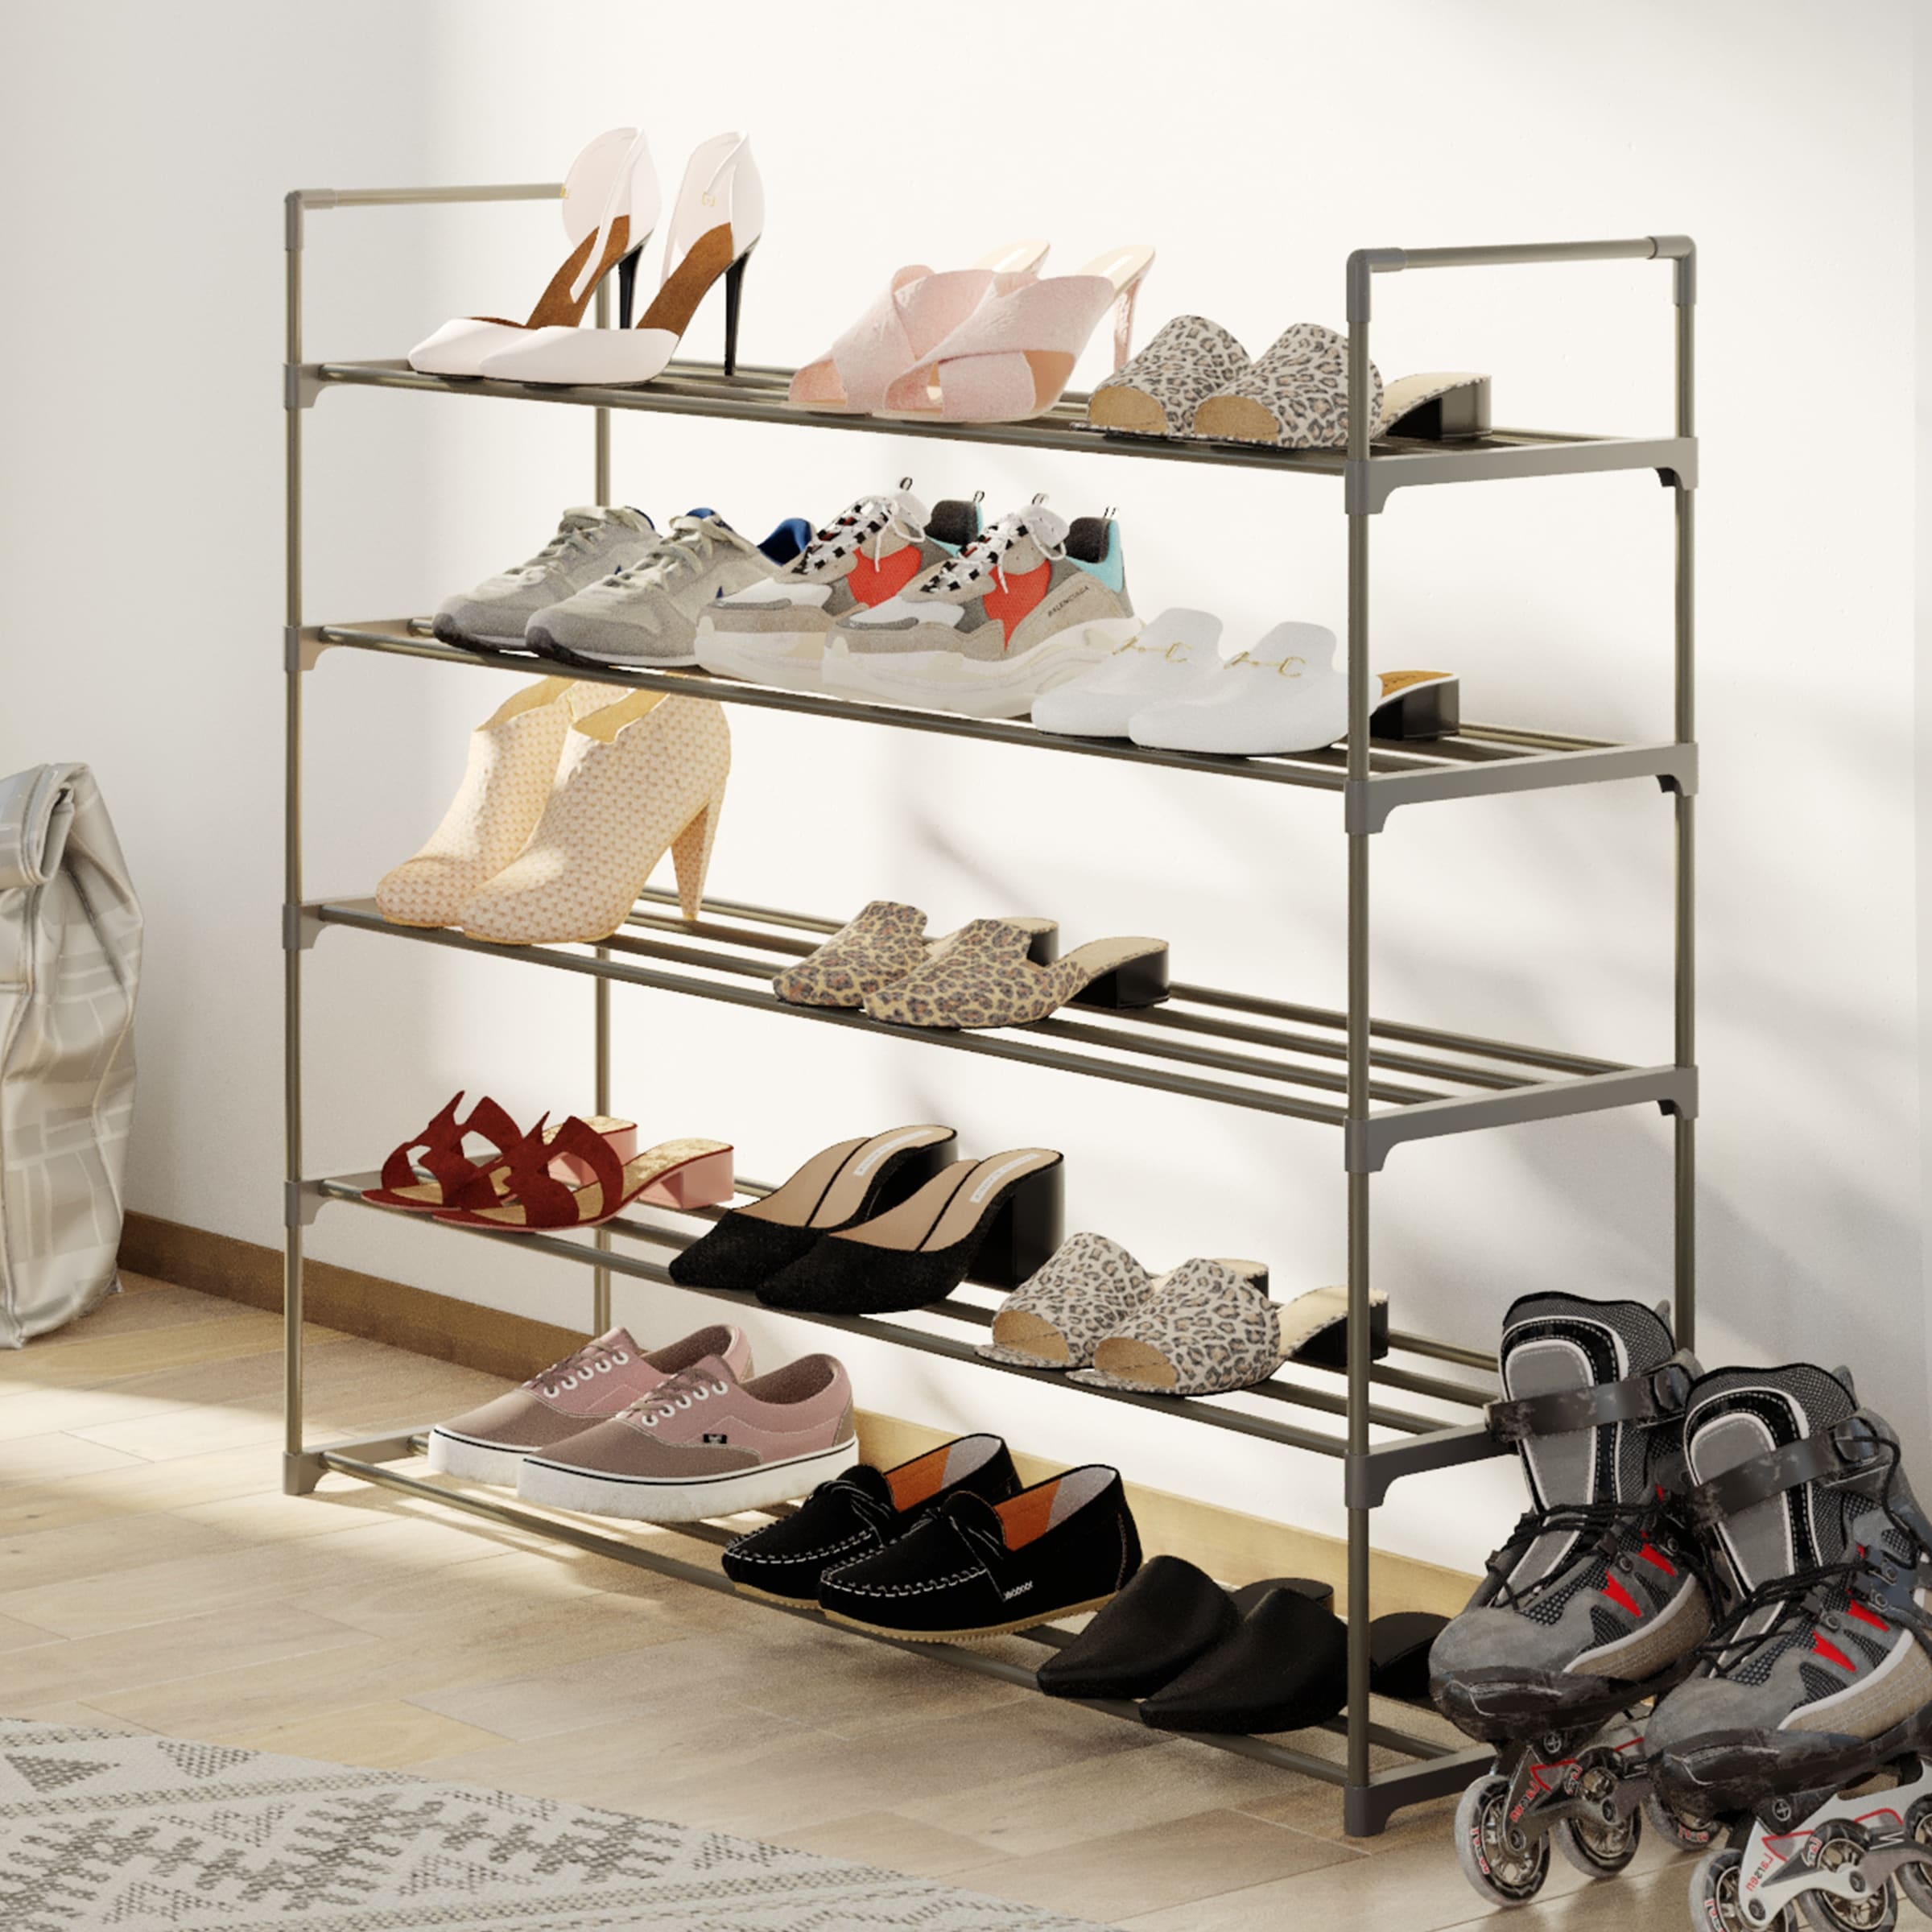 https://ak1.ostkcdn.com/images/products/is/images/direct/c164bb33dcb29fe6f34634ed3f2f0074a5117ce8/Shoe-Rack-%E2%80%93-Multi--Tier-Shoe-Organizer-by-Hastings-Home-%28Gray%29.jpg